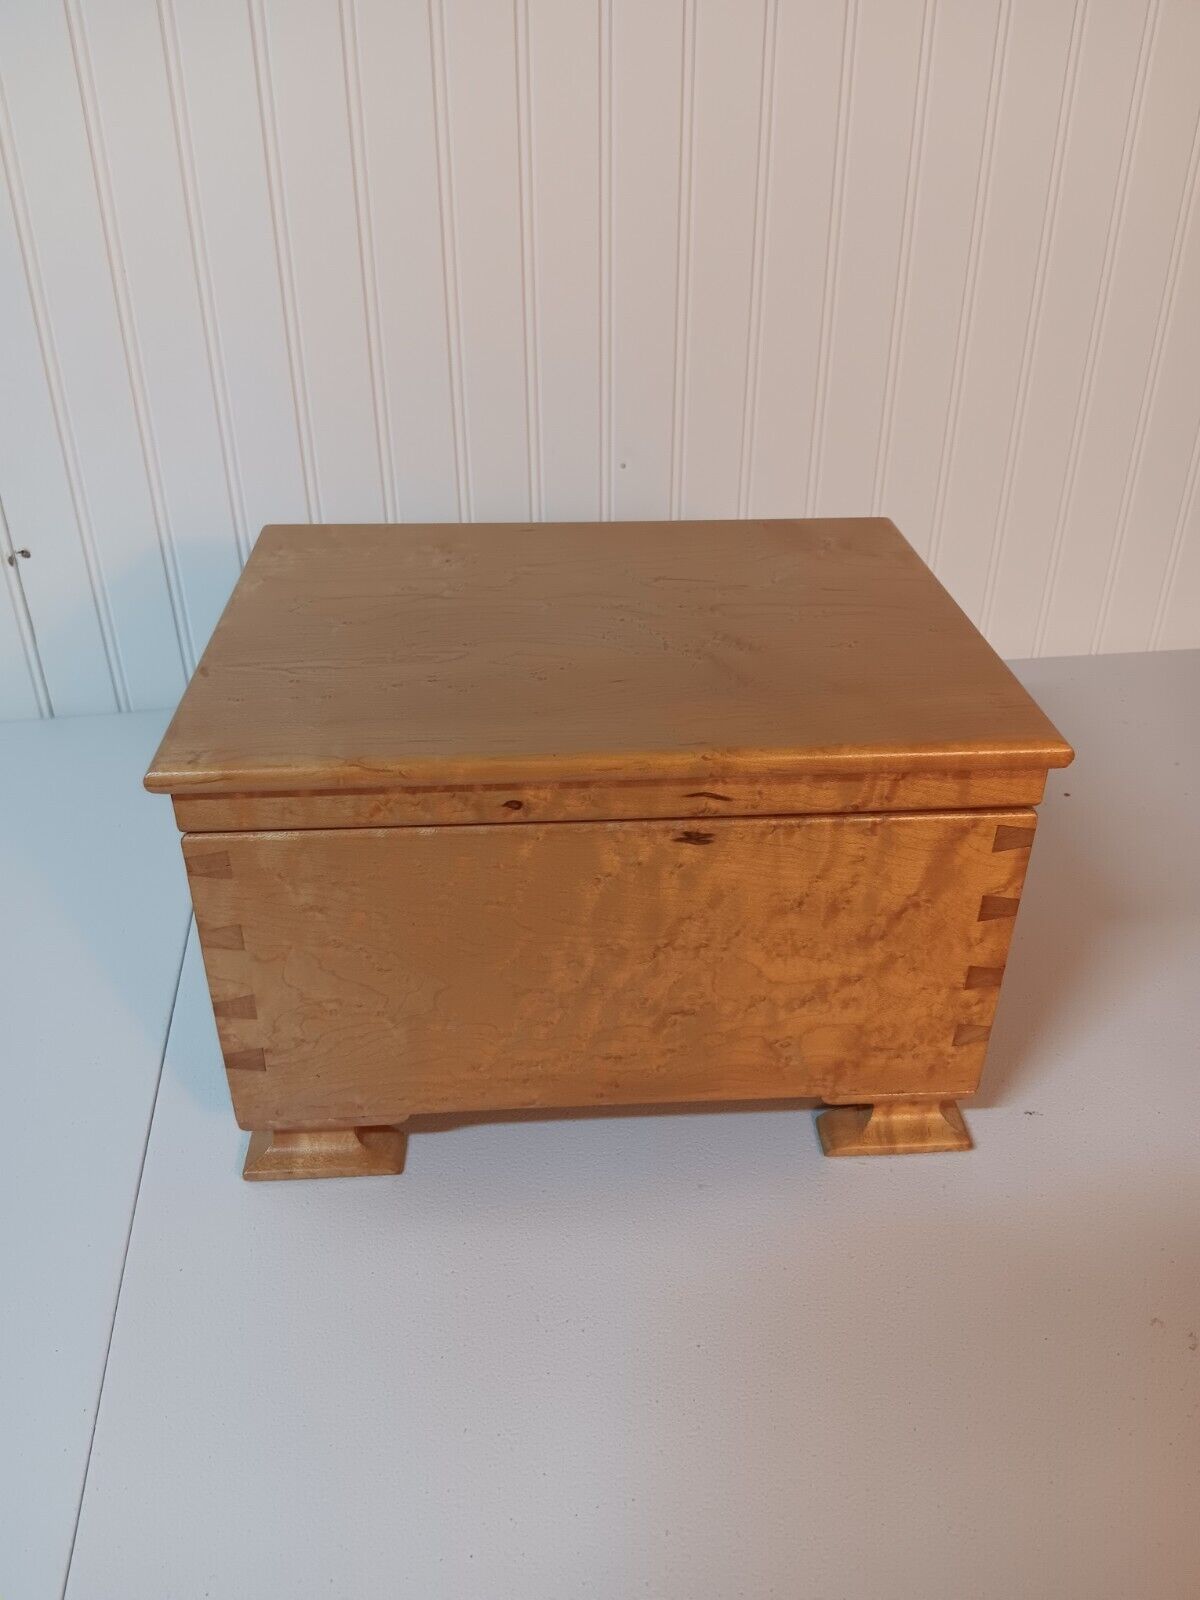 BEAUTIFUL Handcrafted CURLY MAPLE Table Top CIGAR HUMIDOR  12x8x10